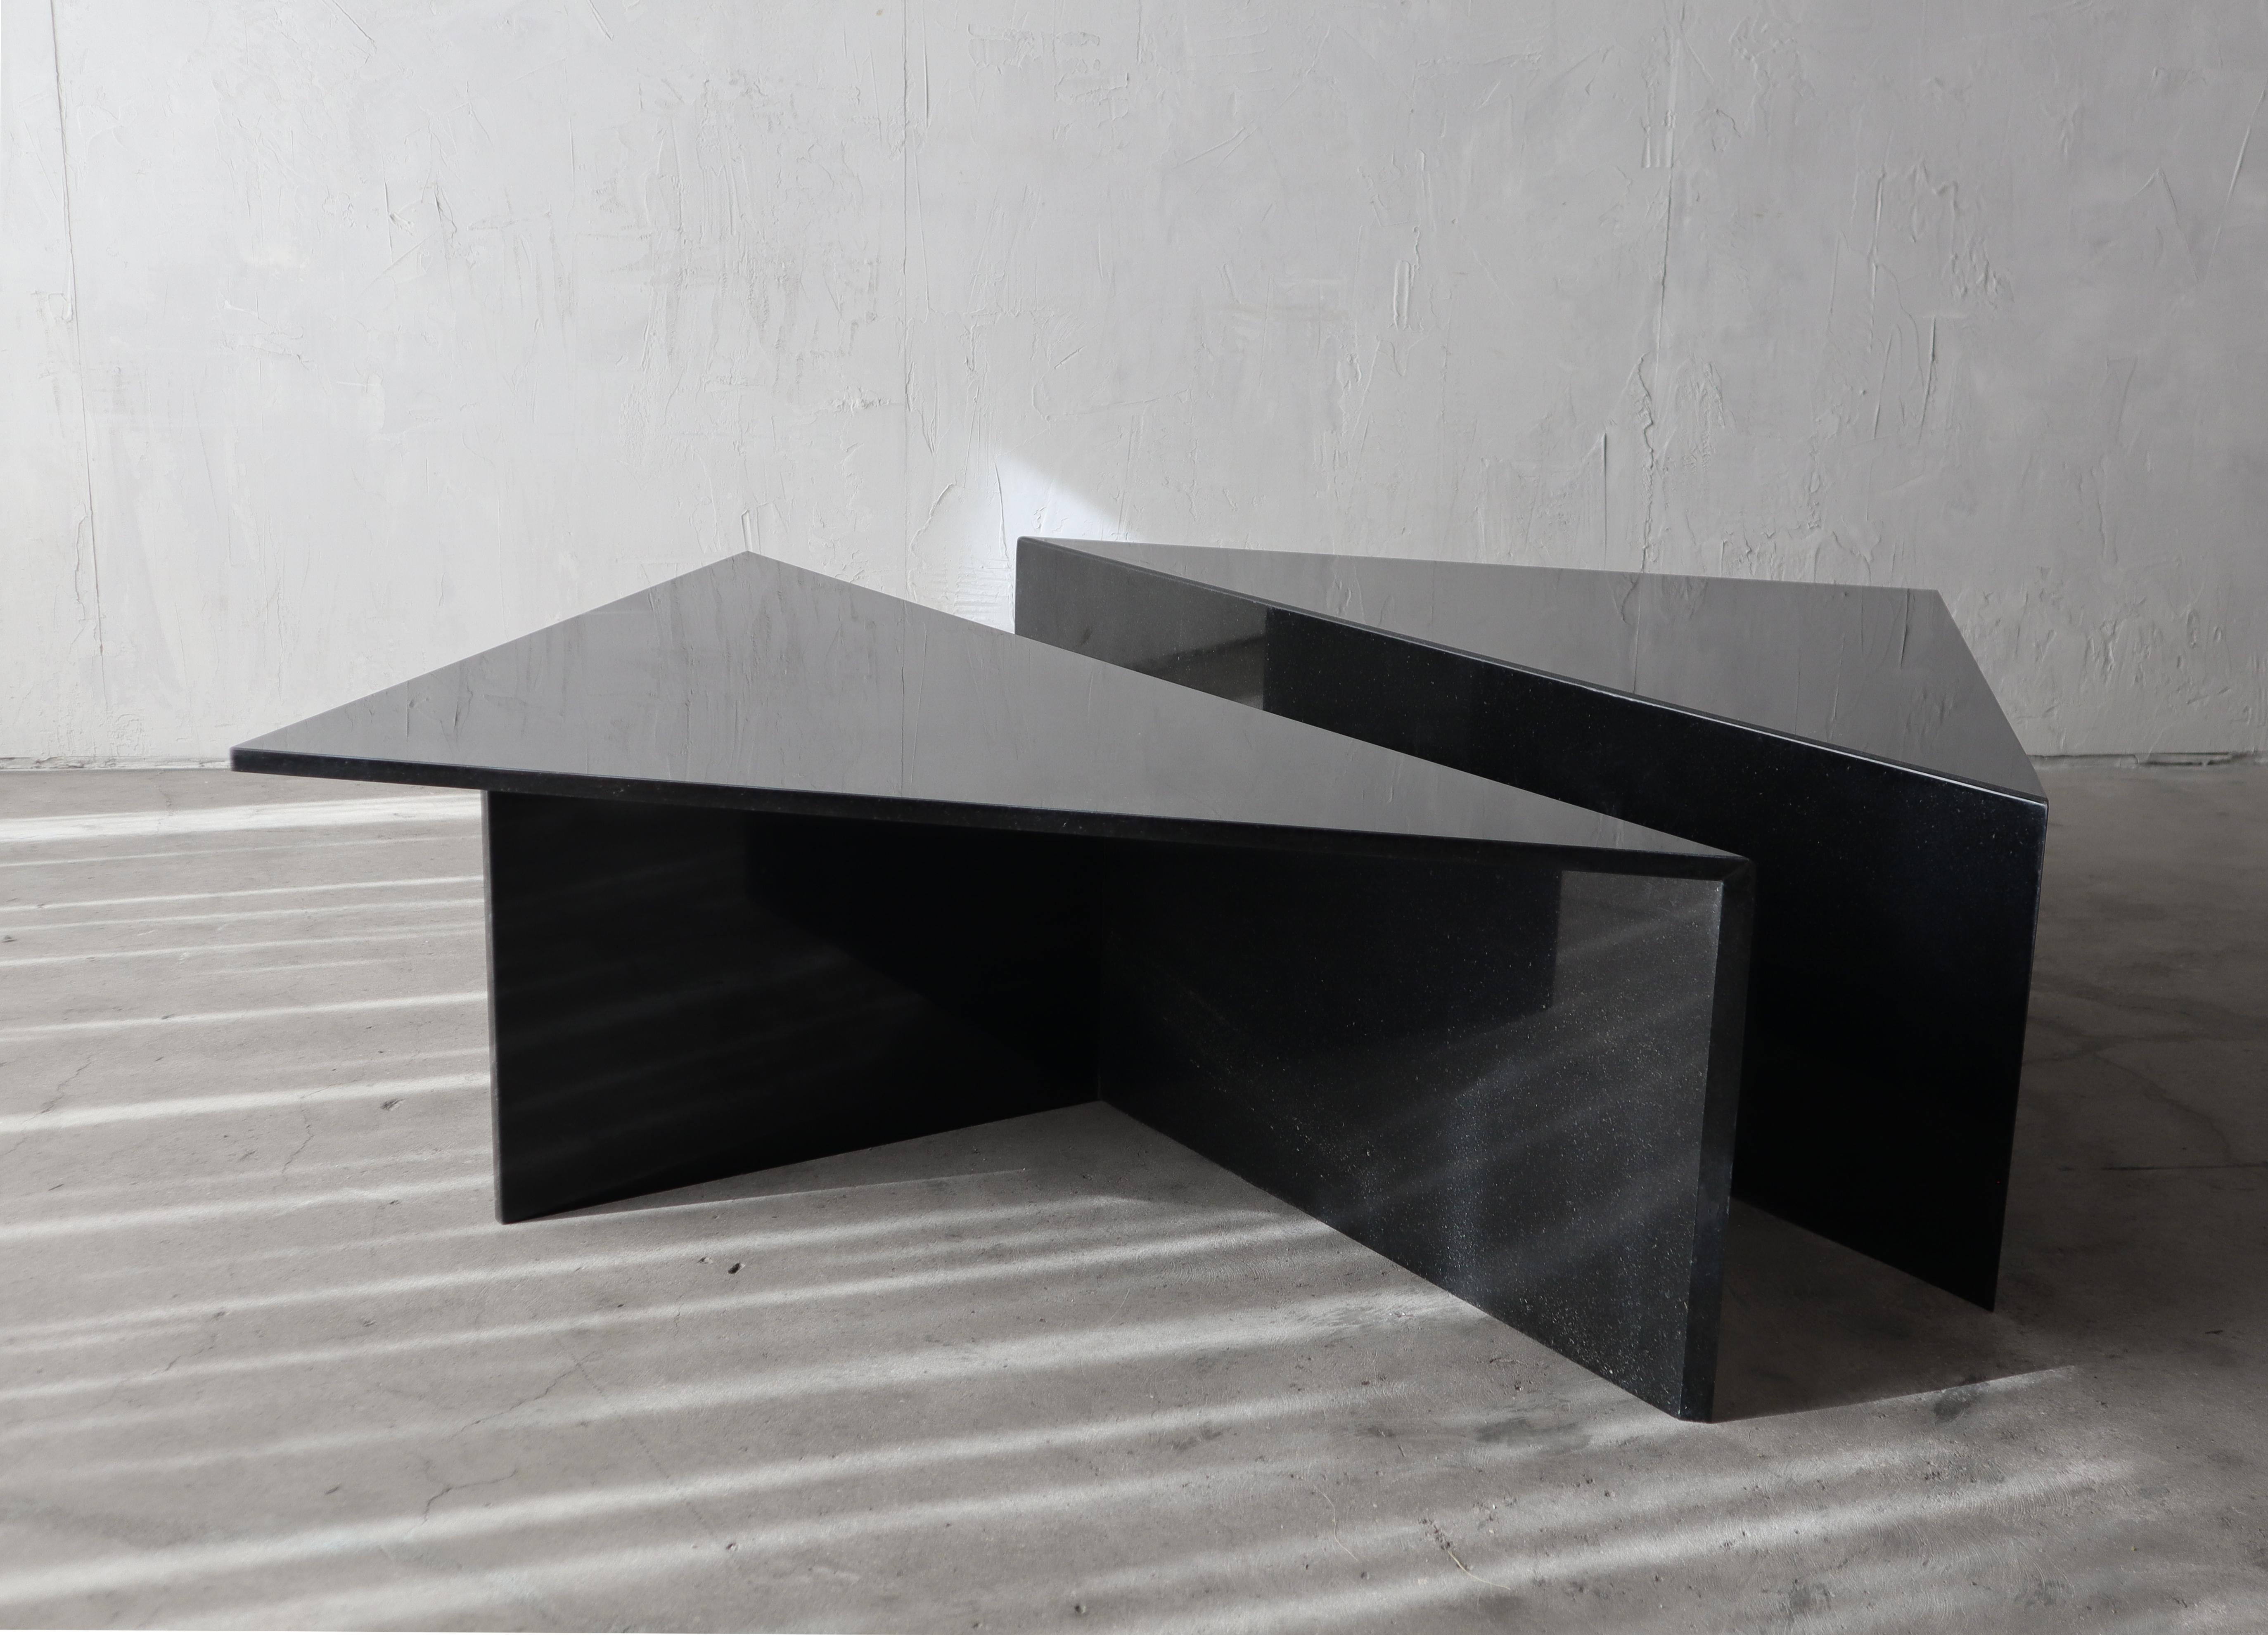 If you've been looking for a Monumental coffee table of epic proportions, Look no further. This gorgeous 2 piece Postmodern granite triangular coffee table is massive. Simple beautiful piece. Table is of modernist and minimal design, comprised of 2